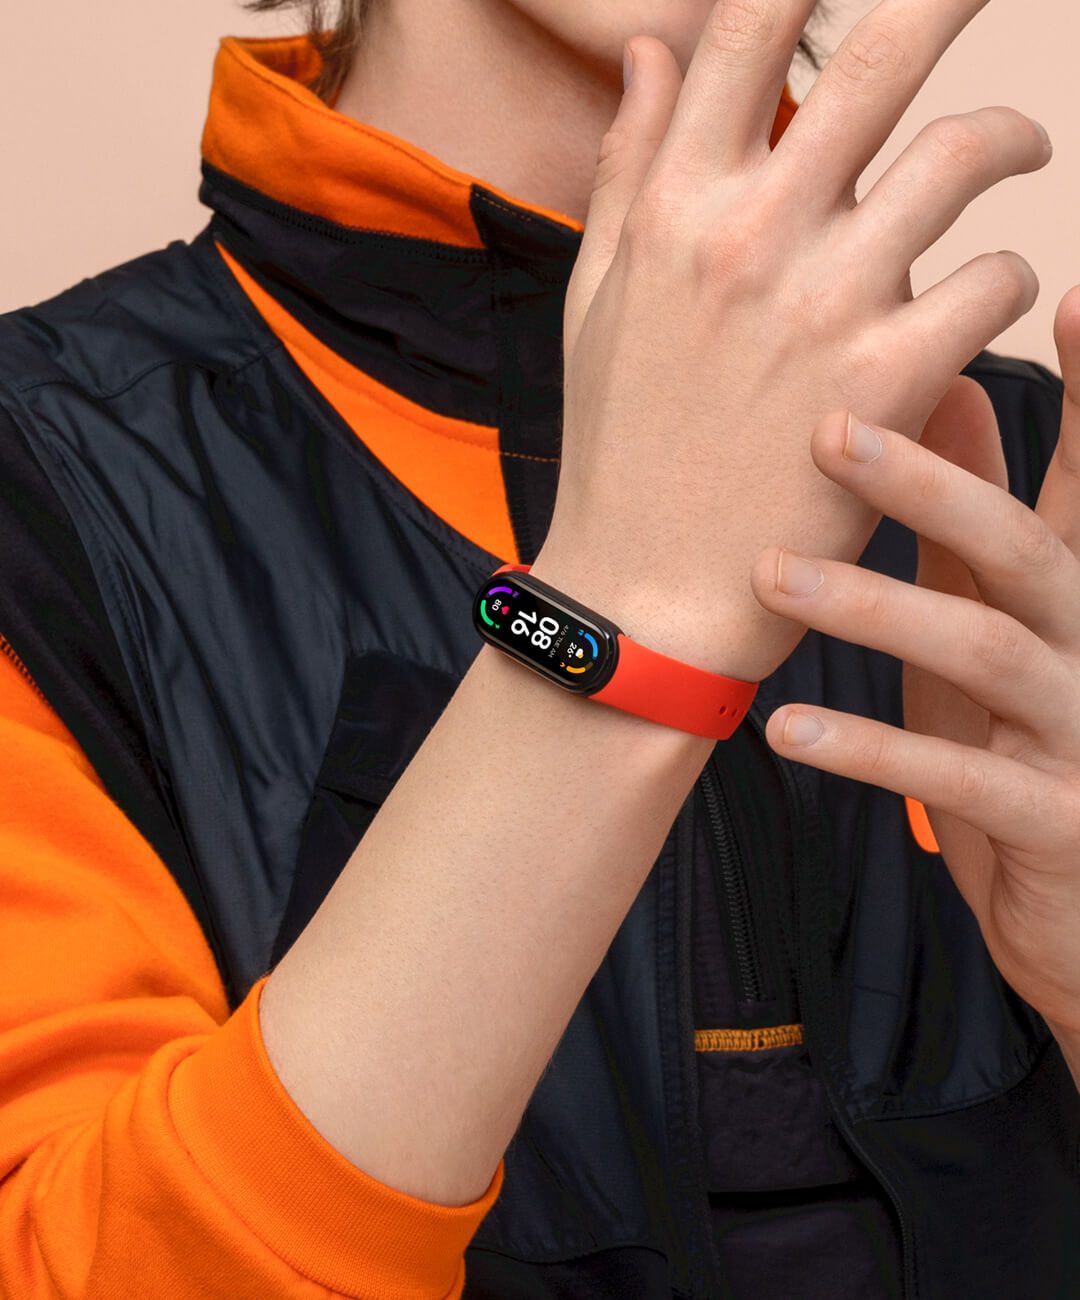 Mi Smart Band 6  Wearable Band Brand in the World - Xiaomi Global  Official